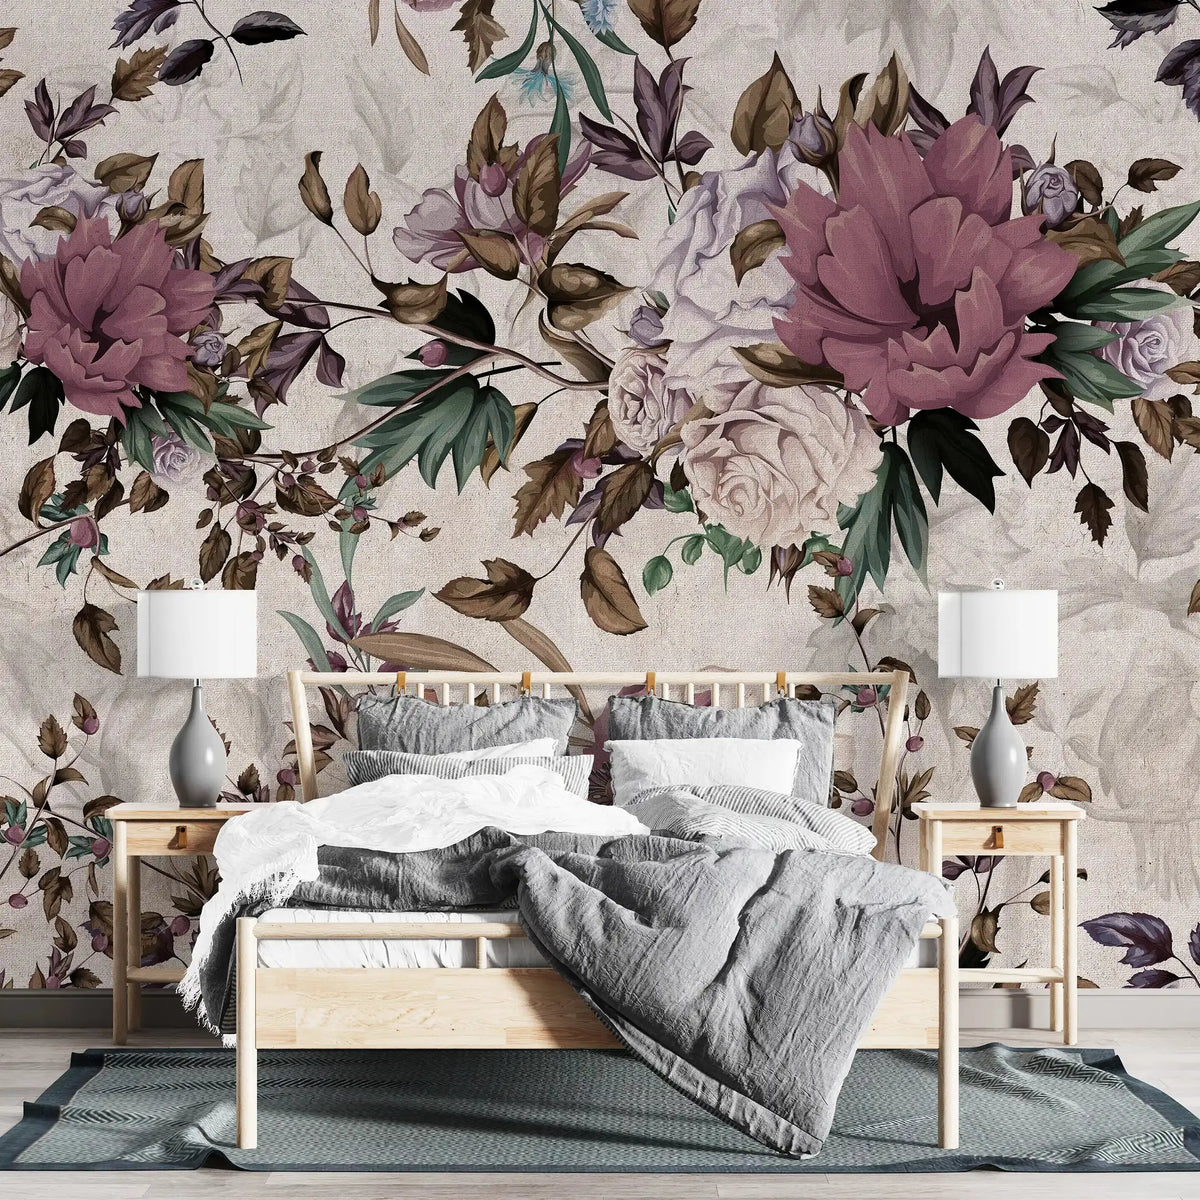 3045-C / Peel and Stick Wallpaper Floral - Large Purple Flowers Design, Adhesive Decorative Paper for Bedroom, Kitchen, and Bathroom - Artevella